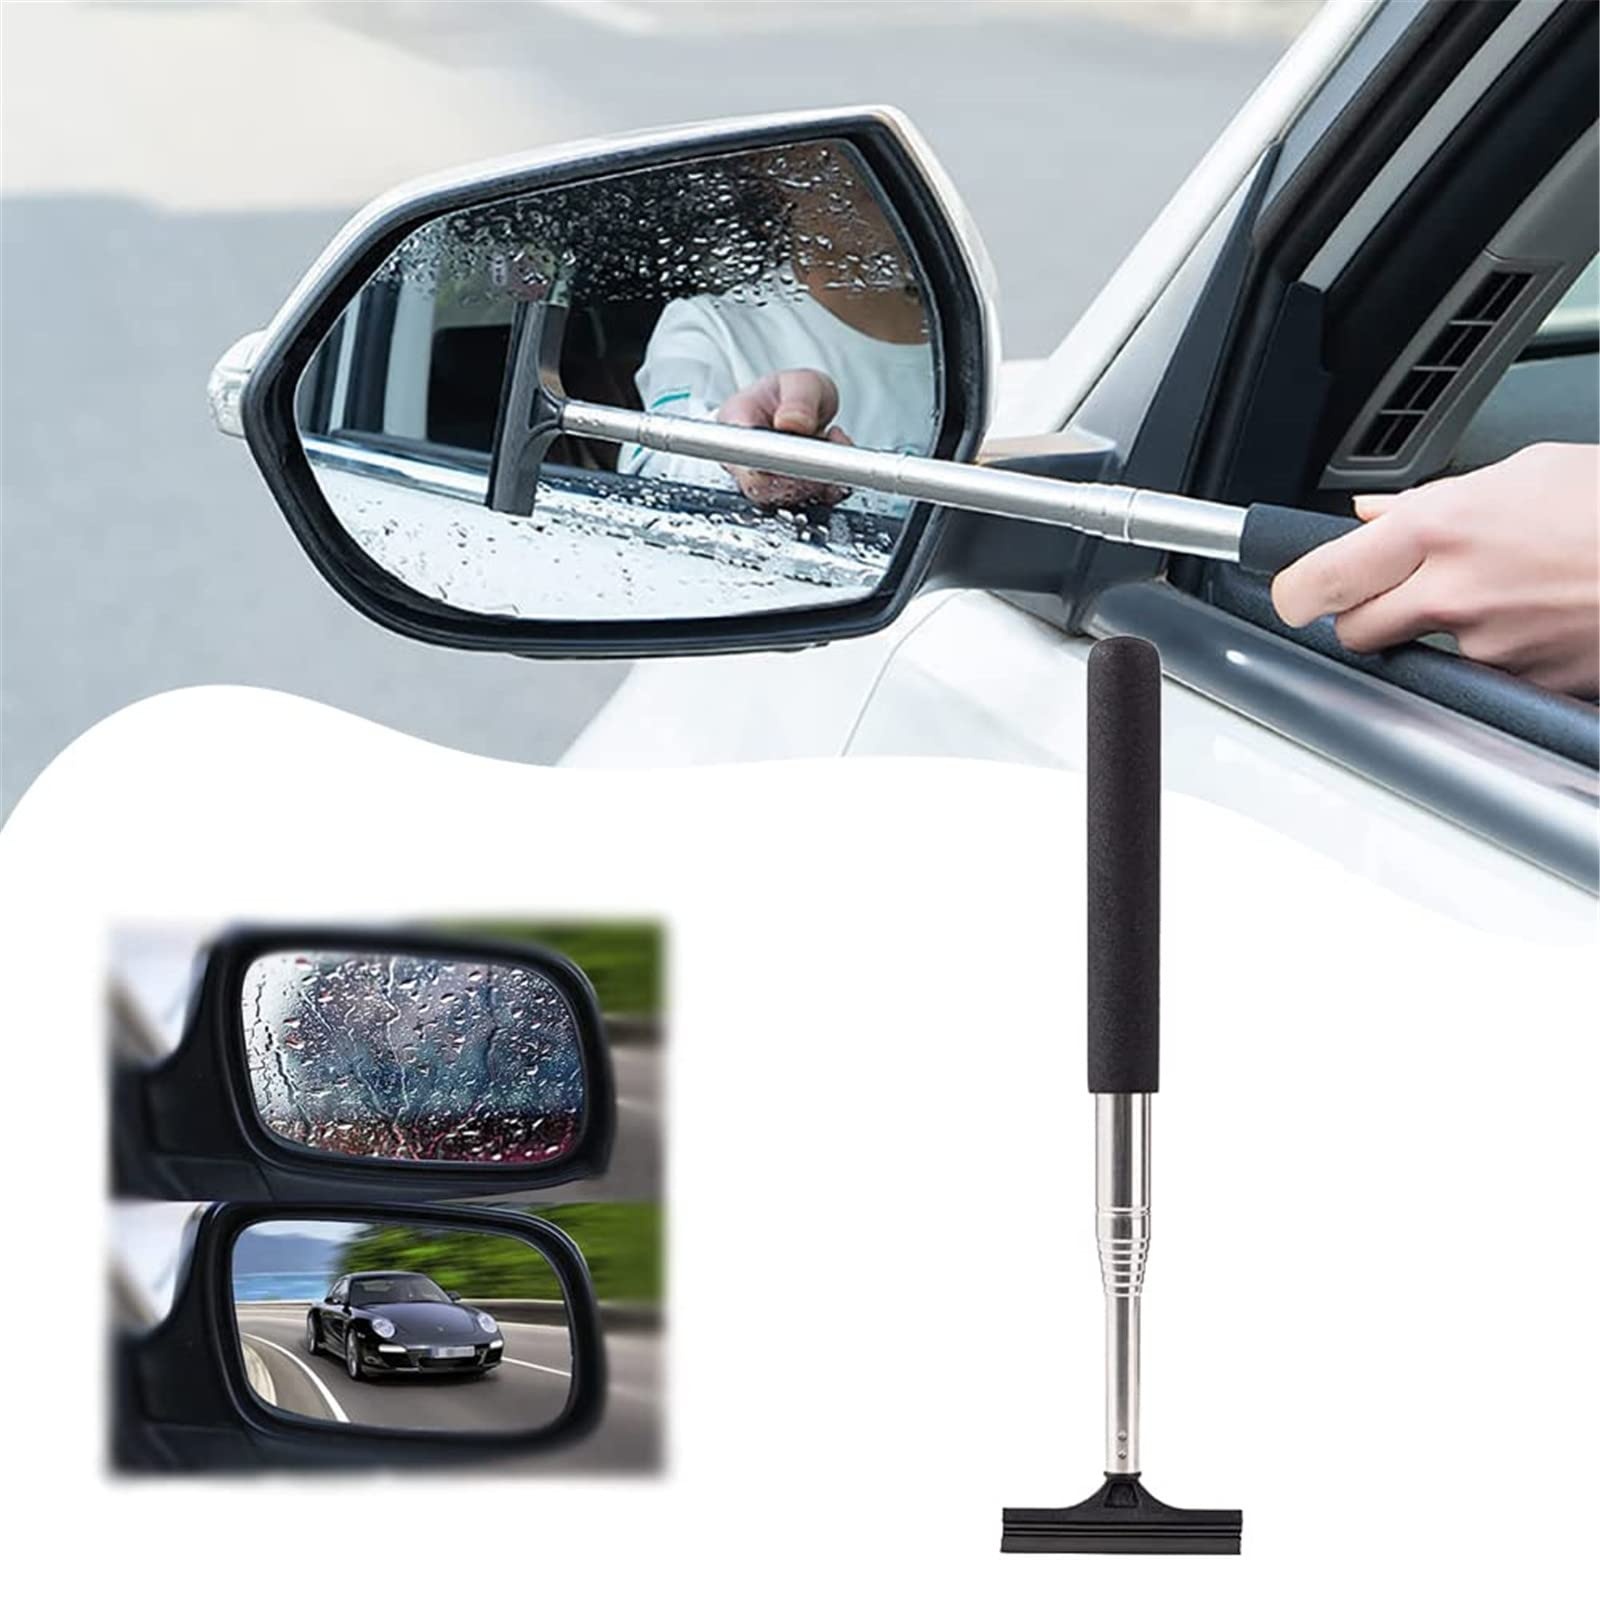 Retractable Rear-View Mirror Wiper,Quickly Wipe Water Removal Towel,Decontamination Mist Removal Water Wiper,Waterproof Anti-Fog Glass Mirror Cleaning Supplies,Length Up to 98cm (Black)